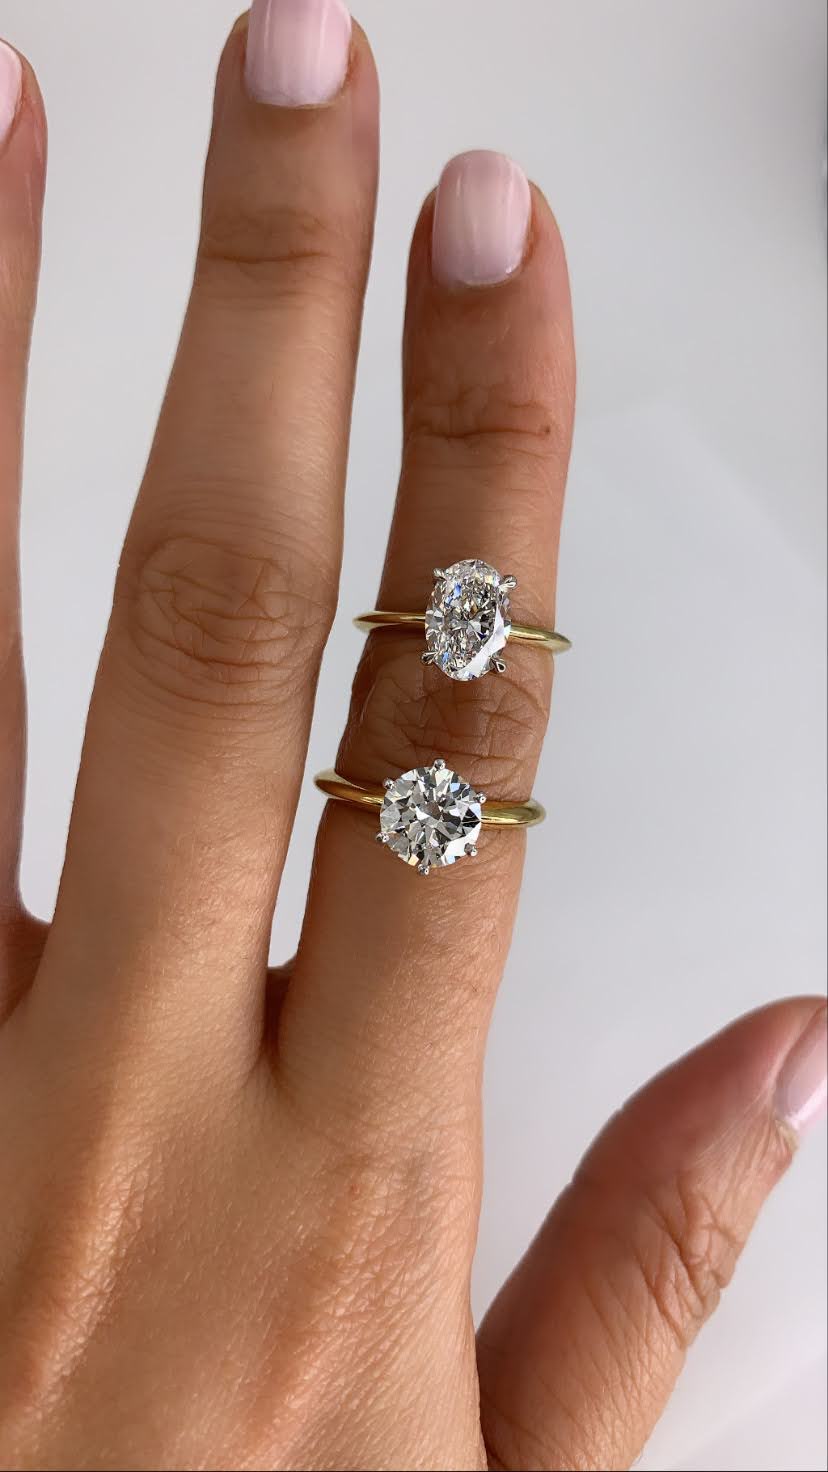 Is the Oval Solitaire Engagement Ring the Biggest? A Simple Size Guide